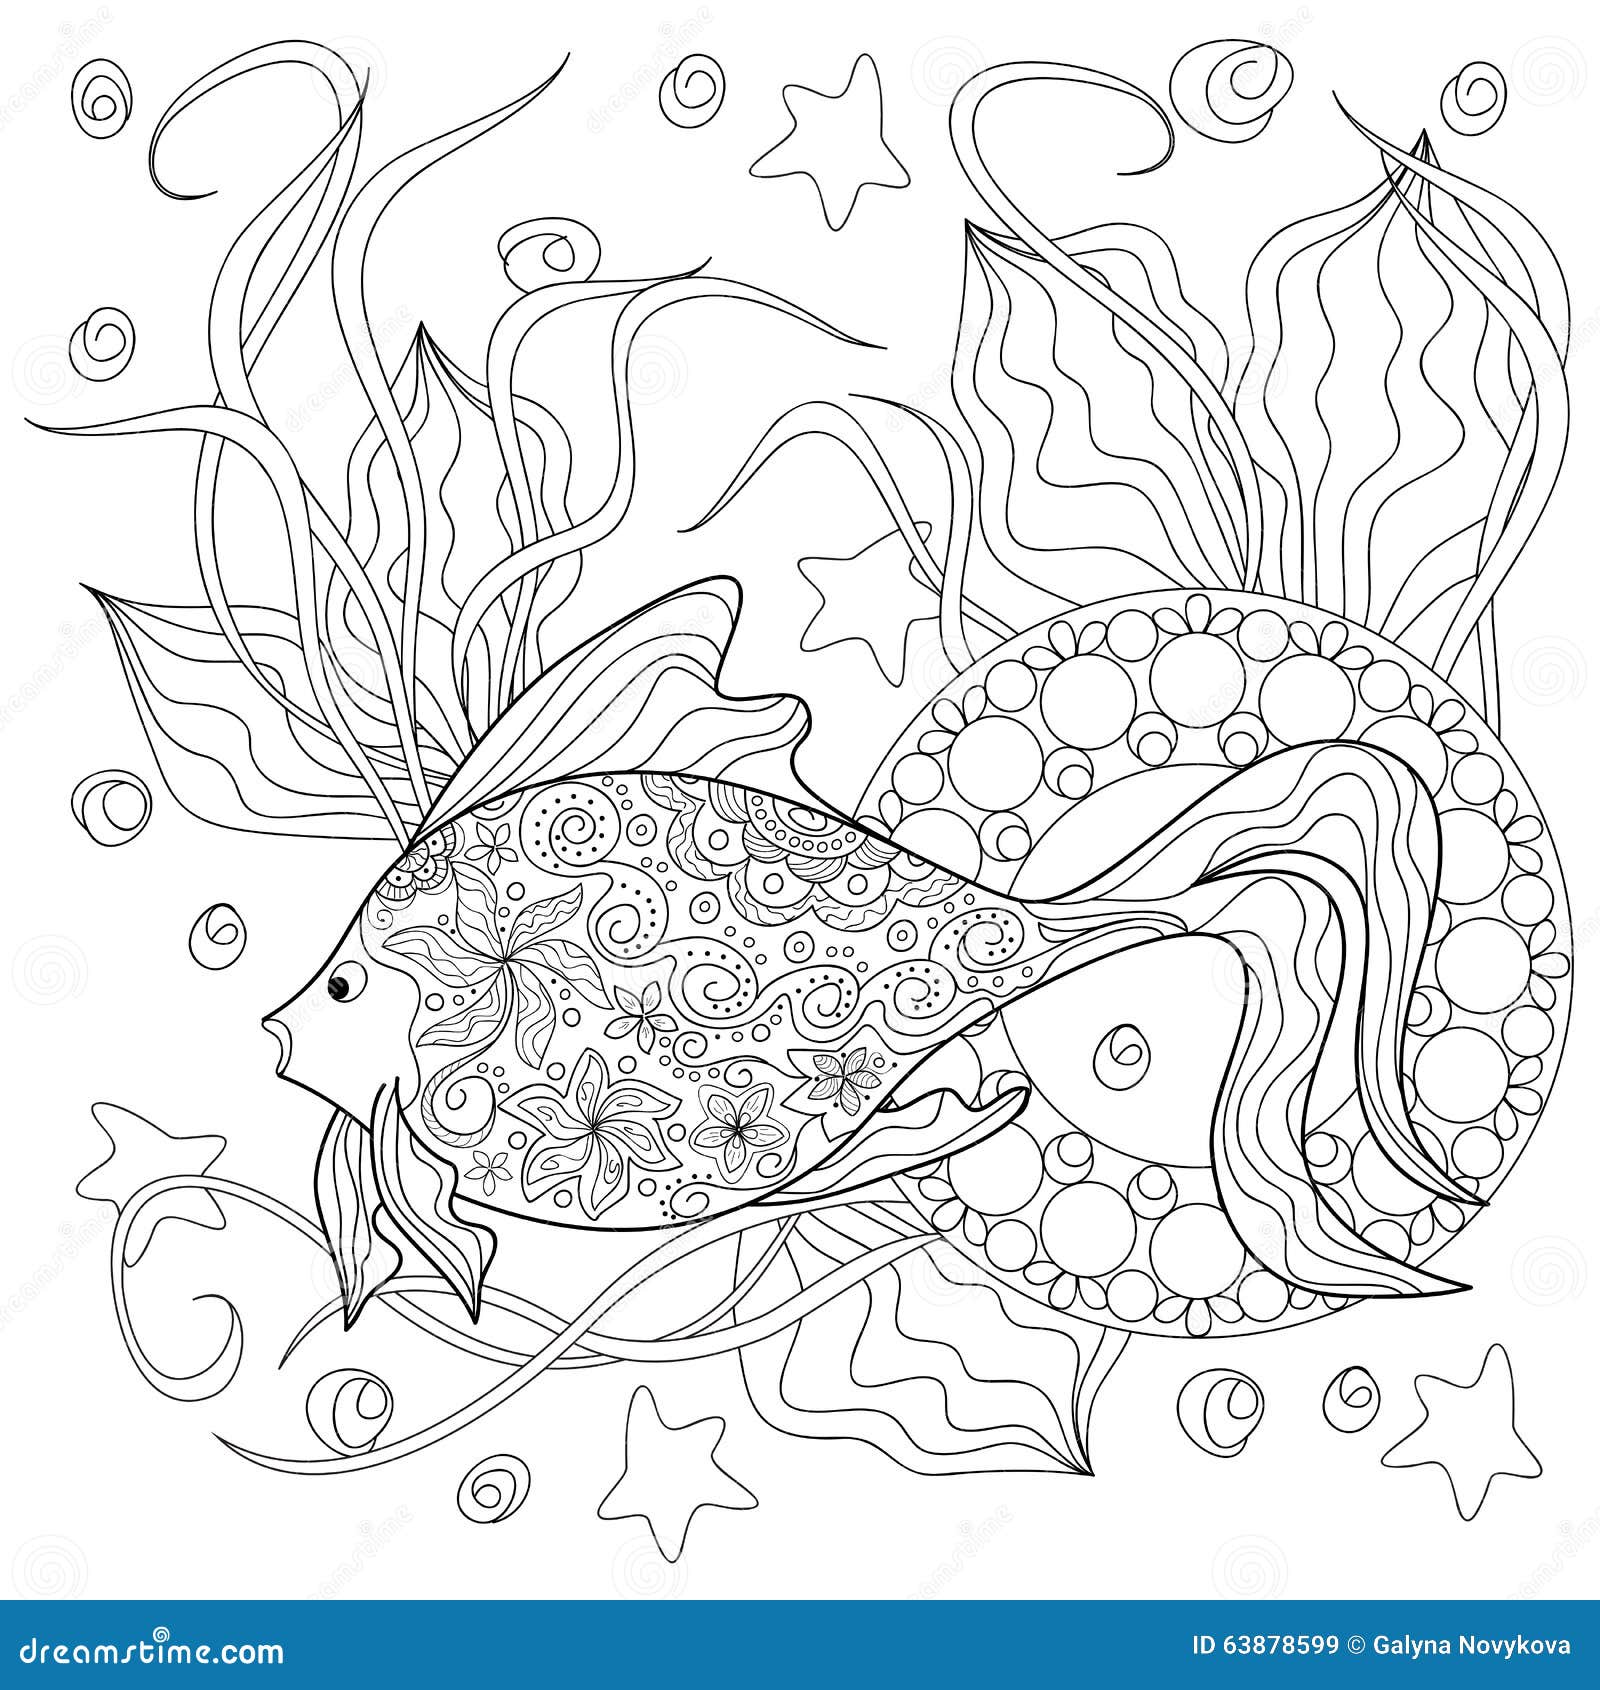 doodle fish and mandalas stock vector illustration of